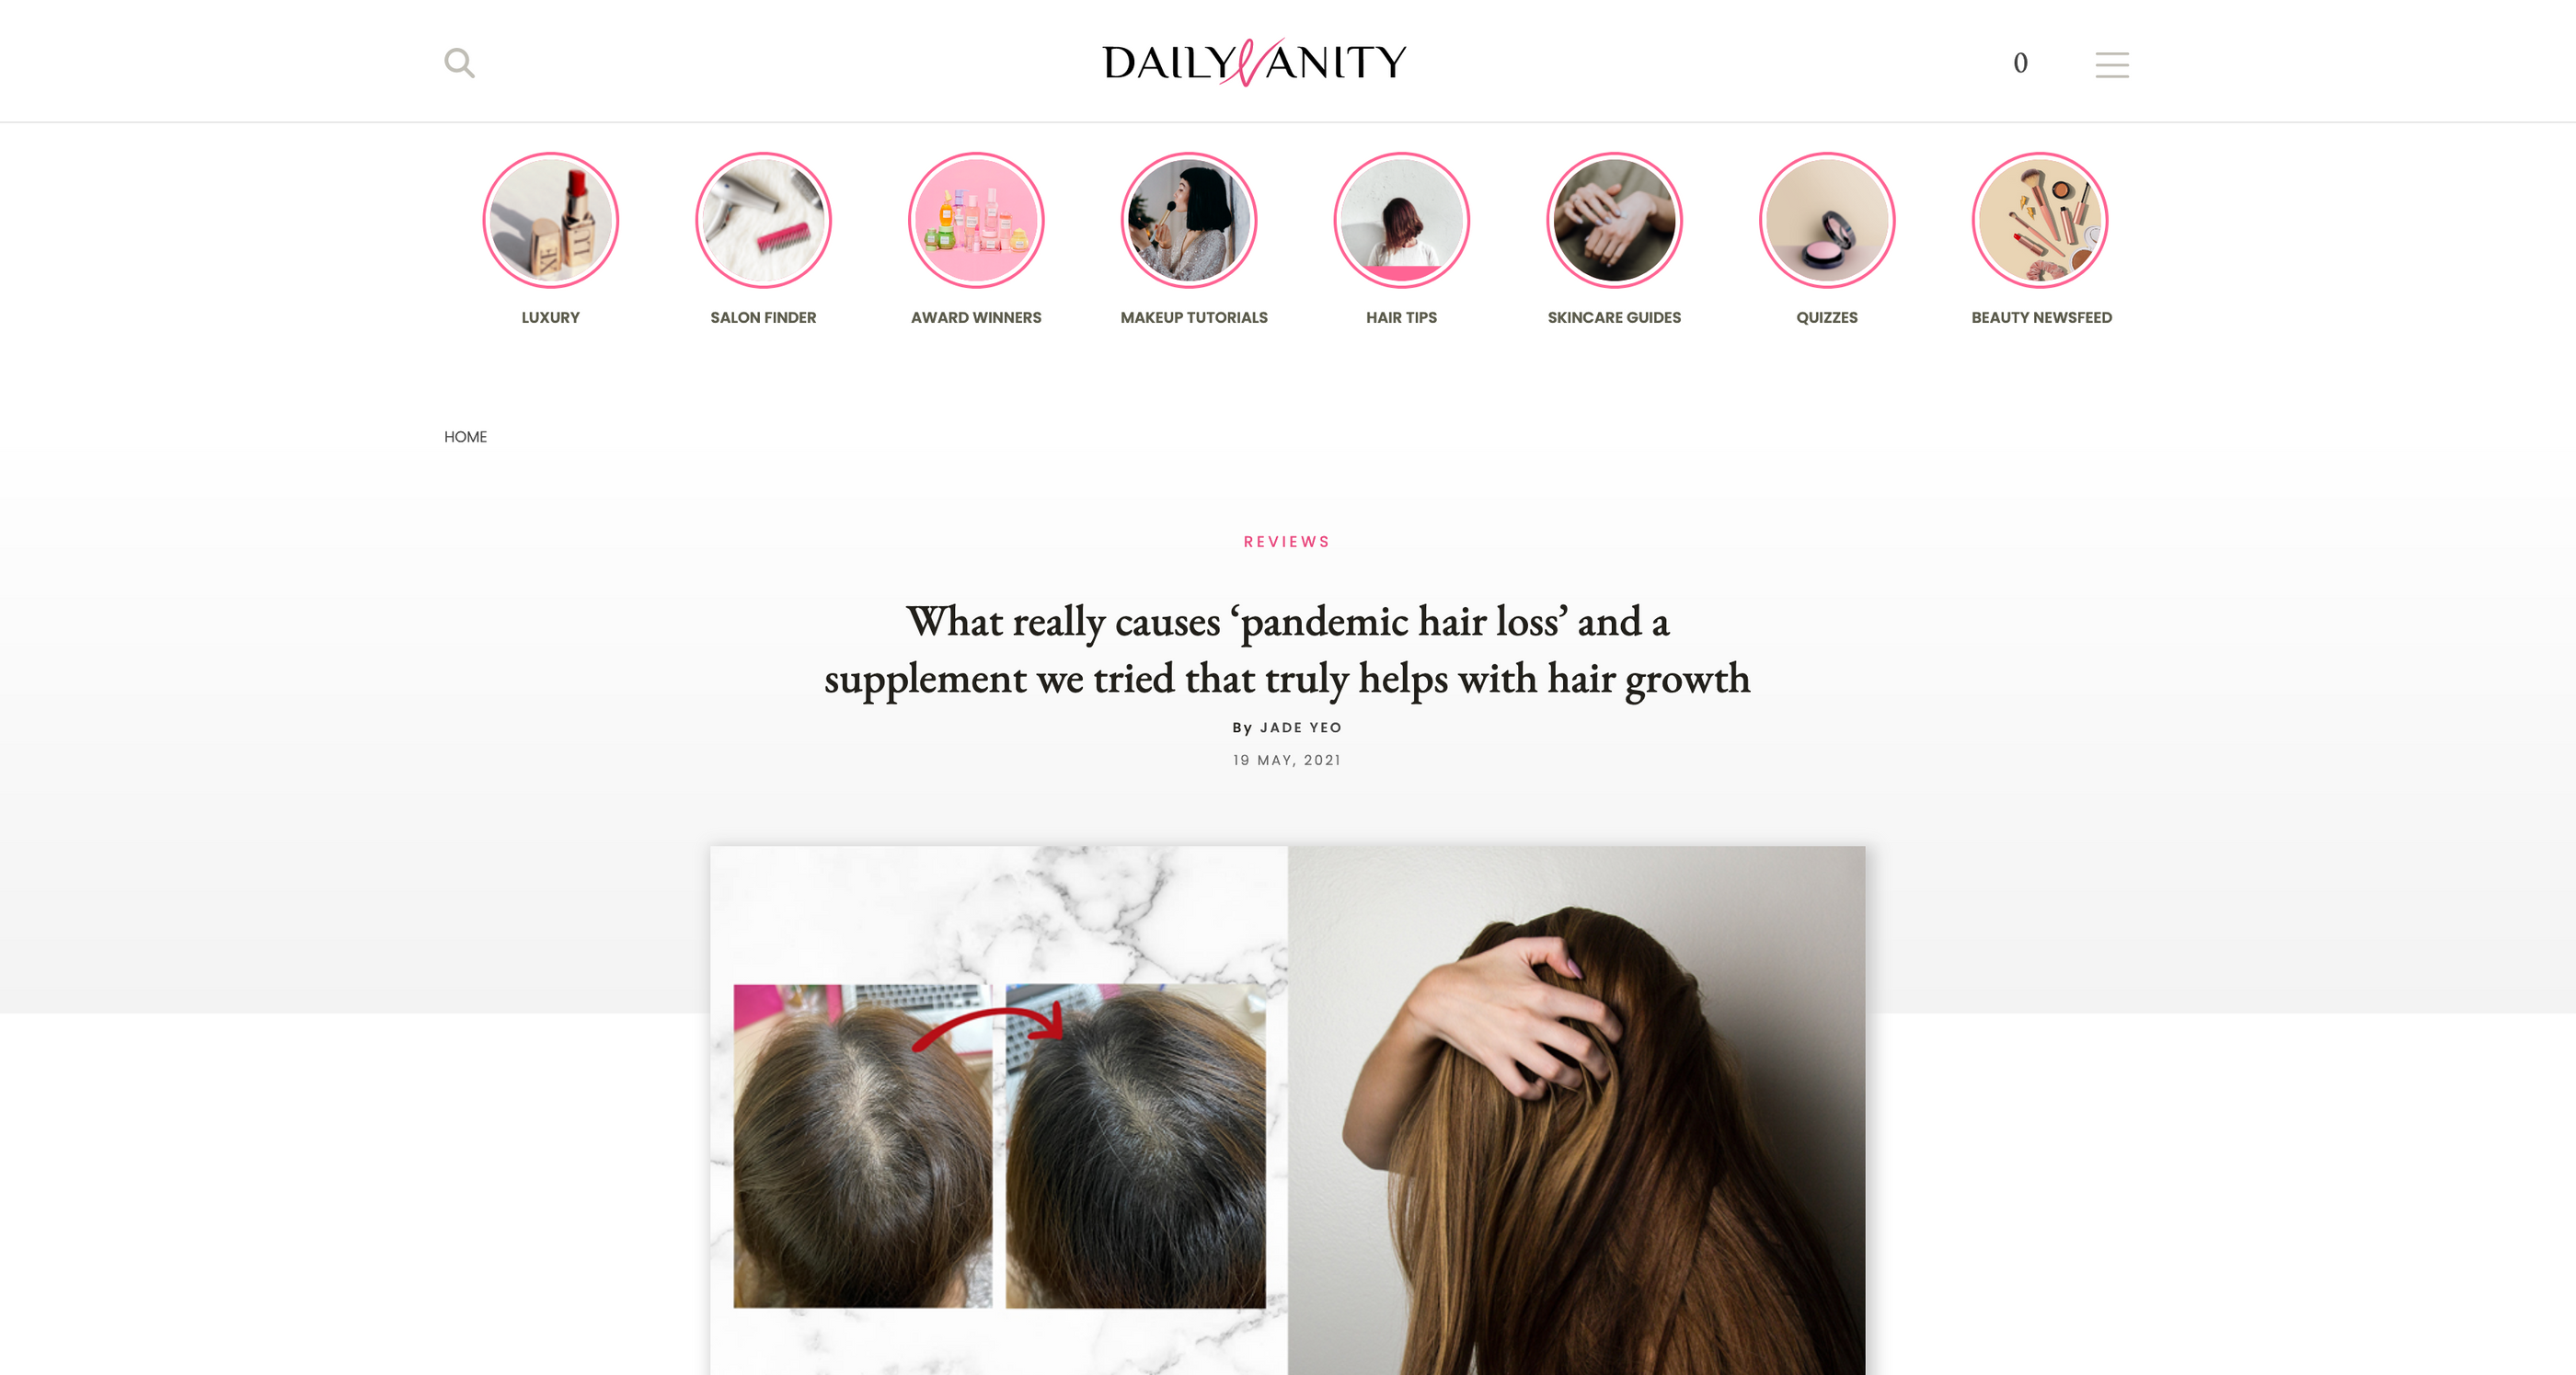 What Really Causes ‘Pandemic Hair Loss’ and a Supplement We Tried That Truly Helps With Hair Growth by Daily Vanity